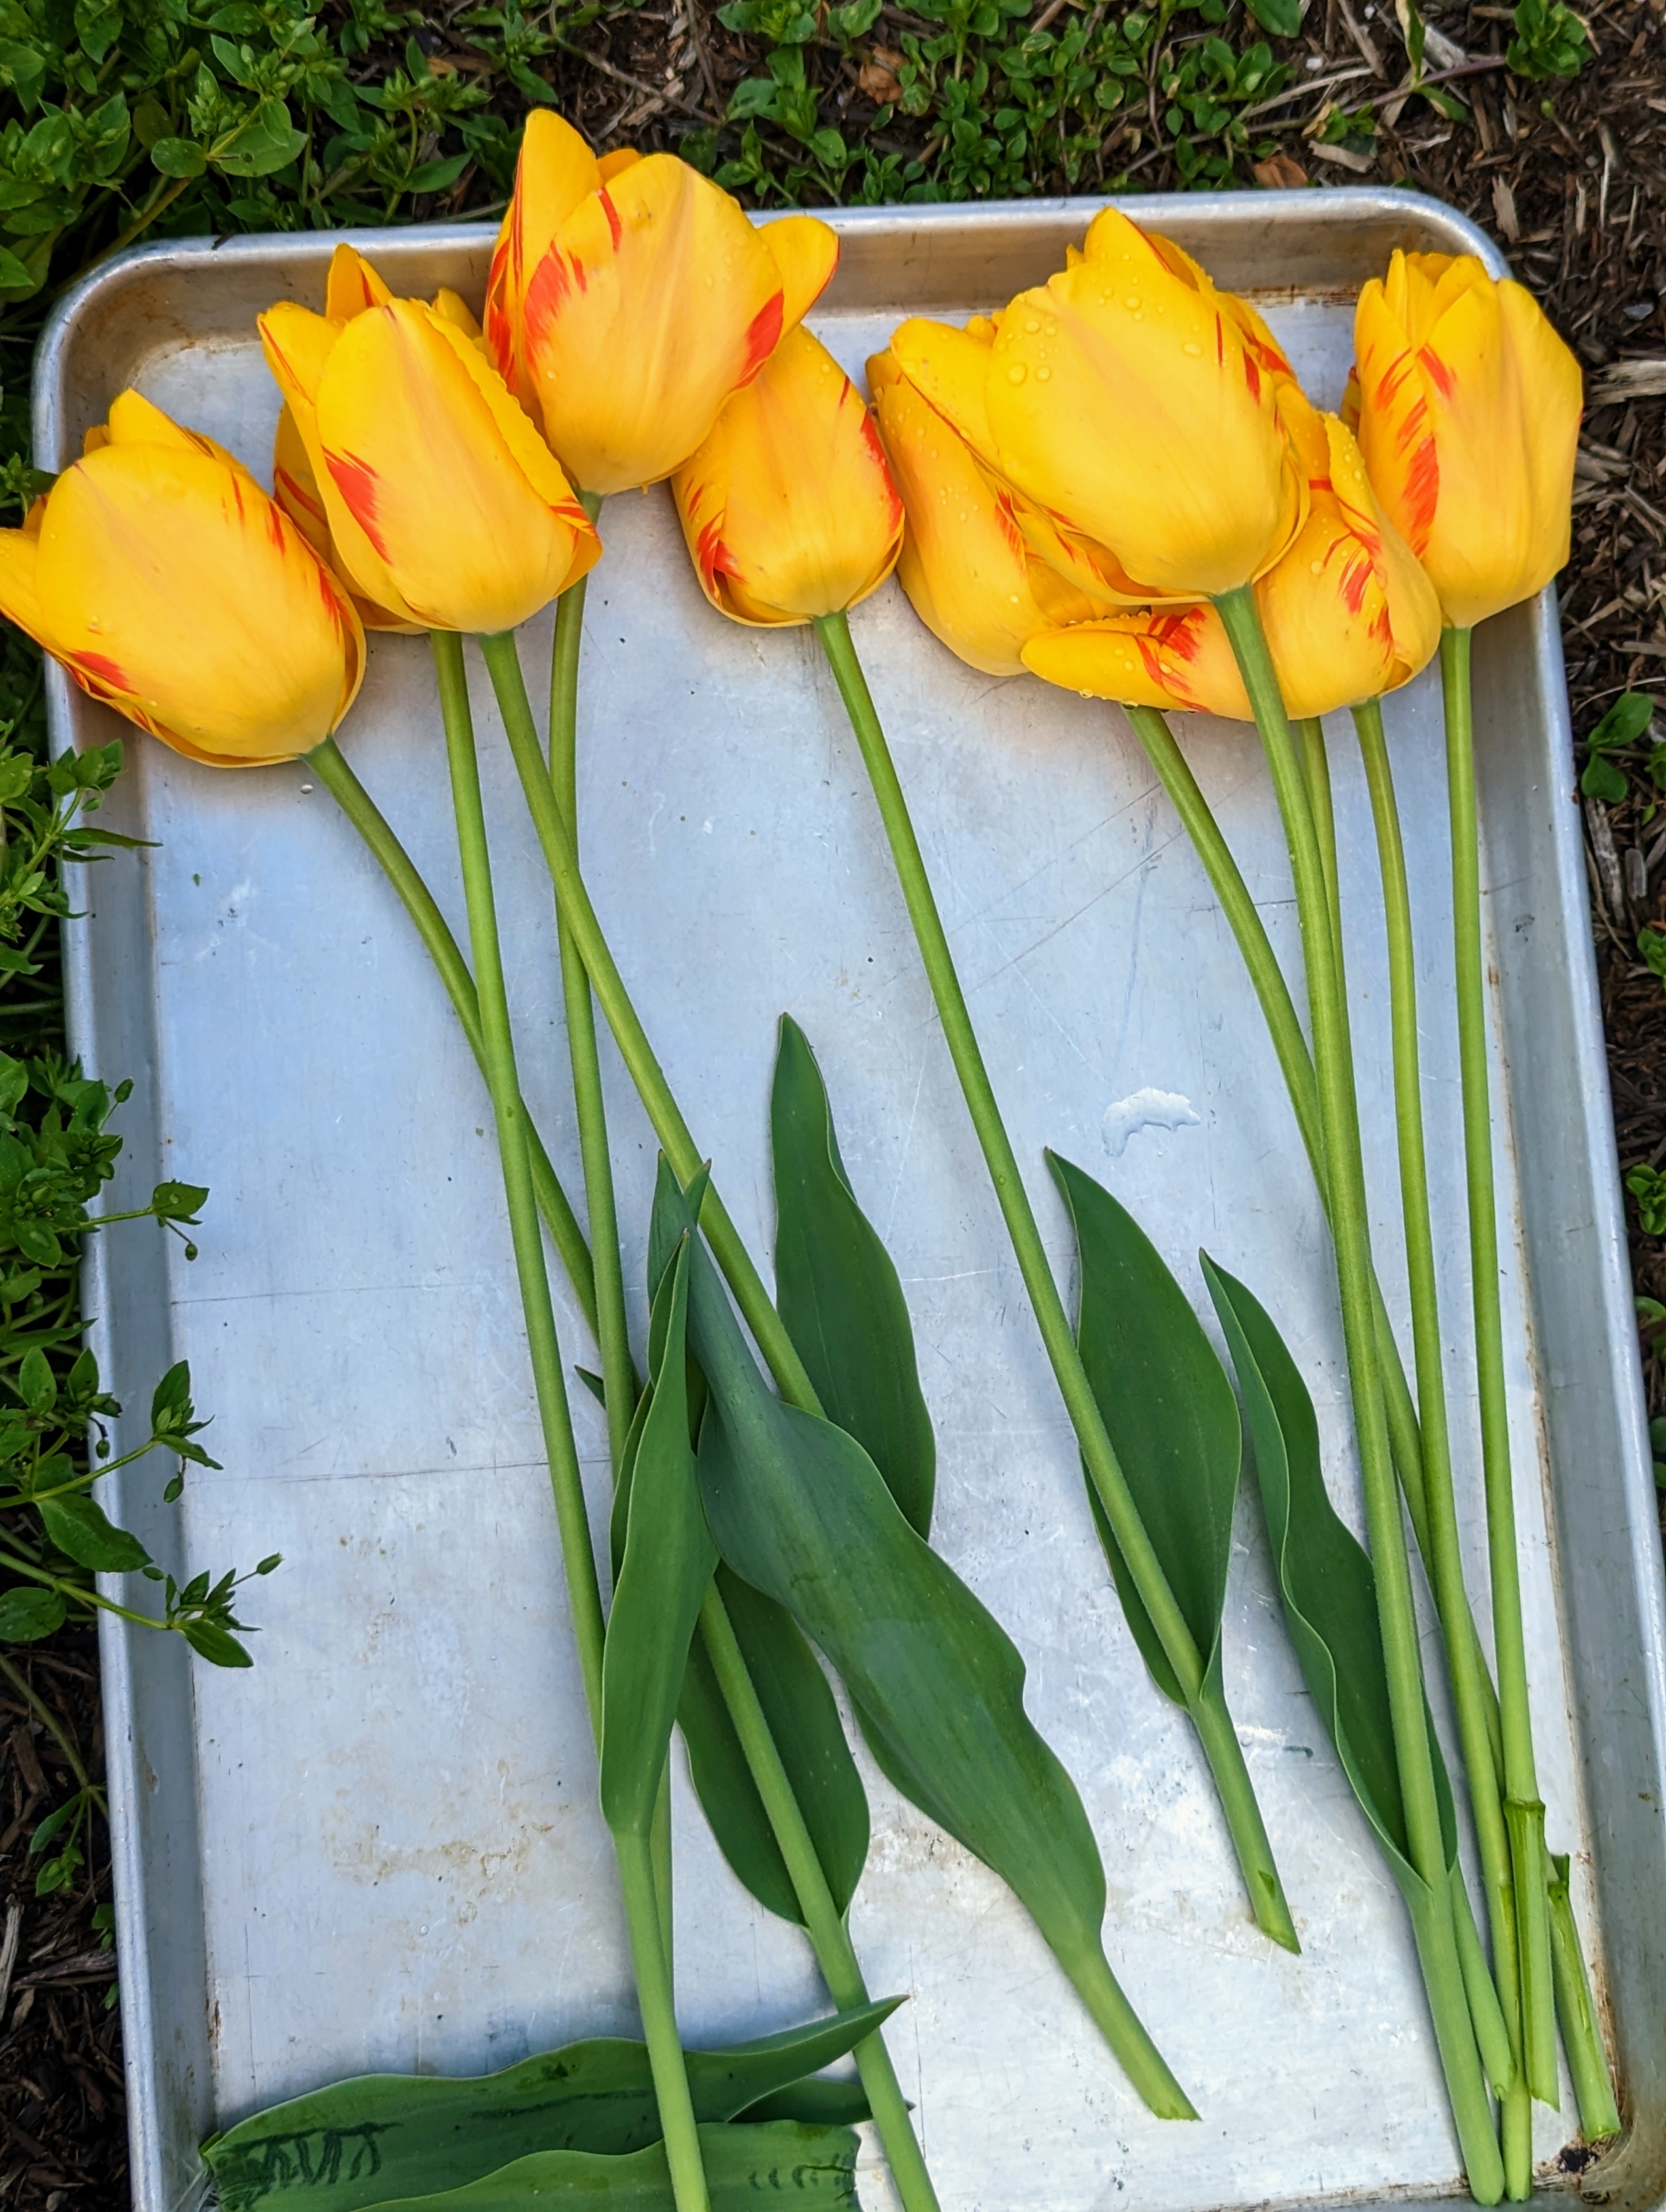 4 Expert Tips for When and How to Cut Tulips in Your Garden